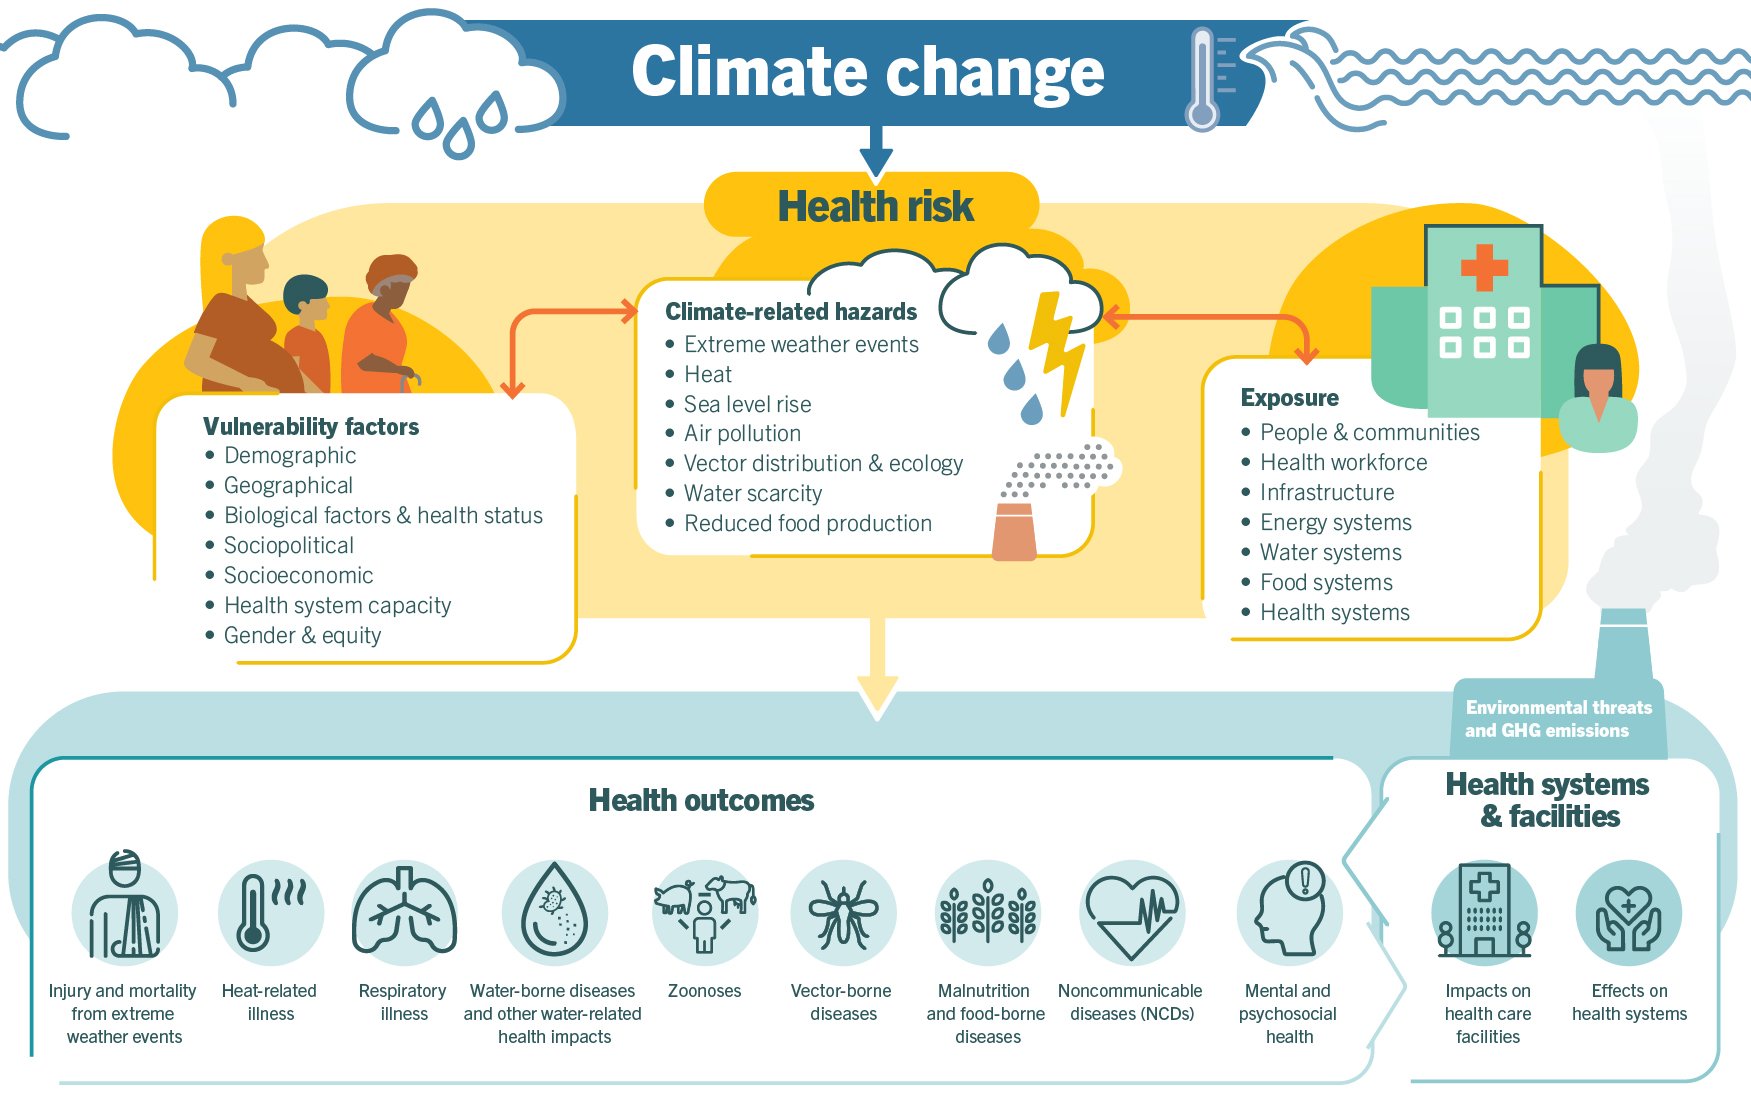 Climate change presents a fundamental threat to human health.